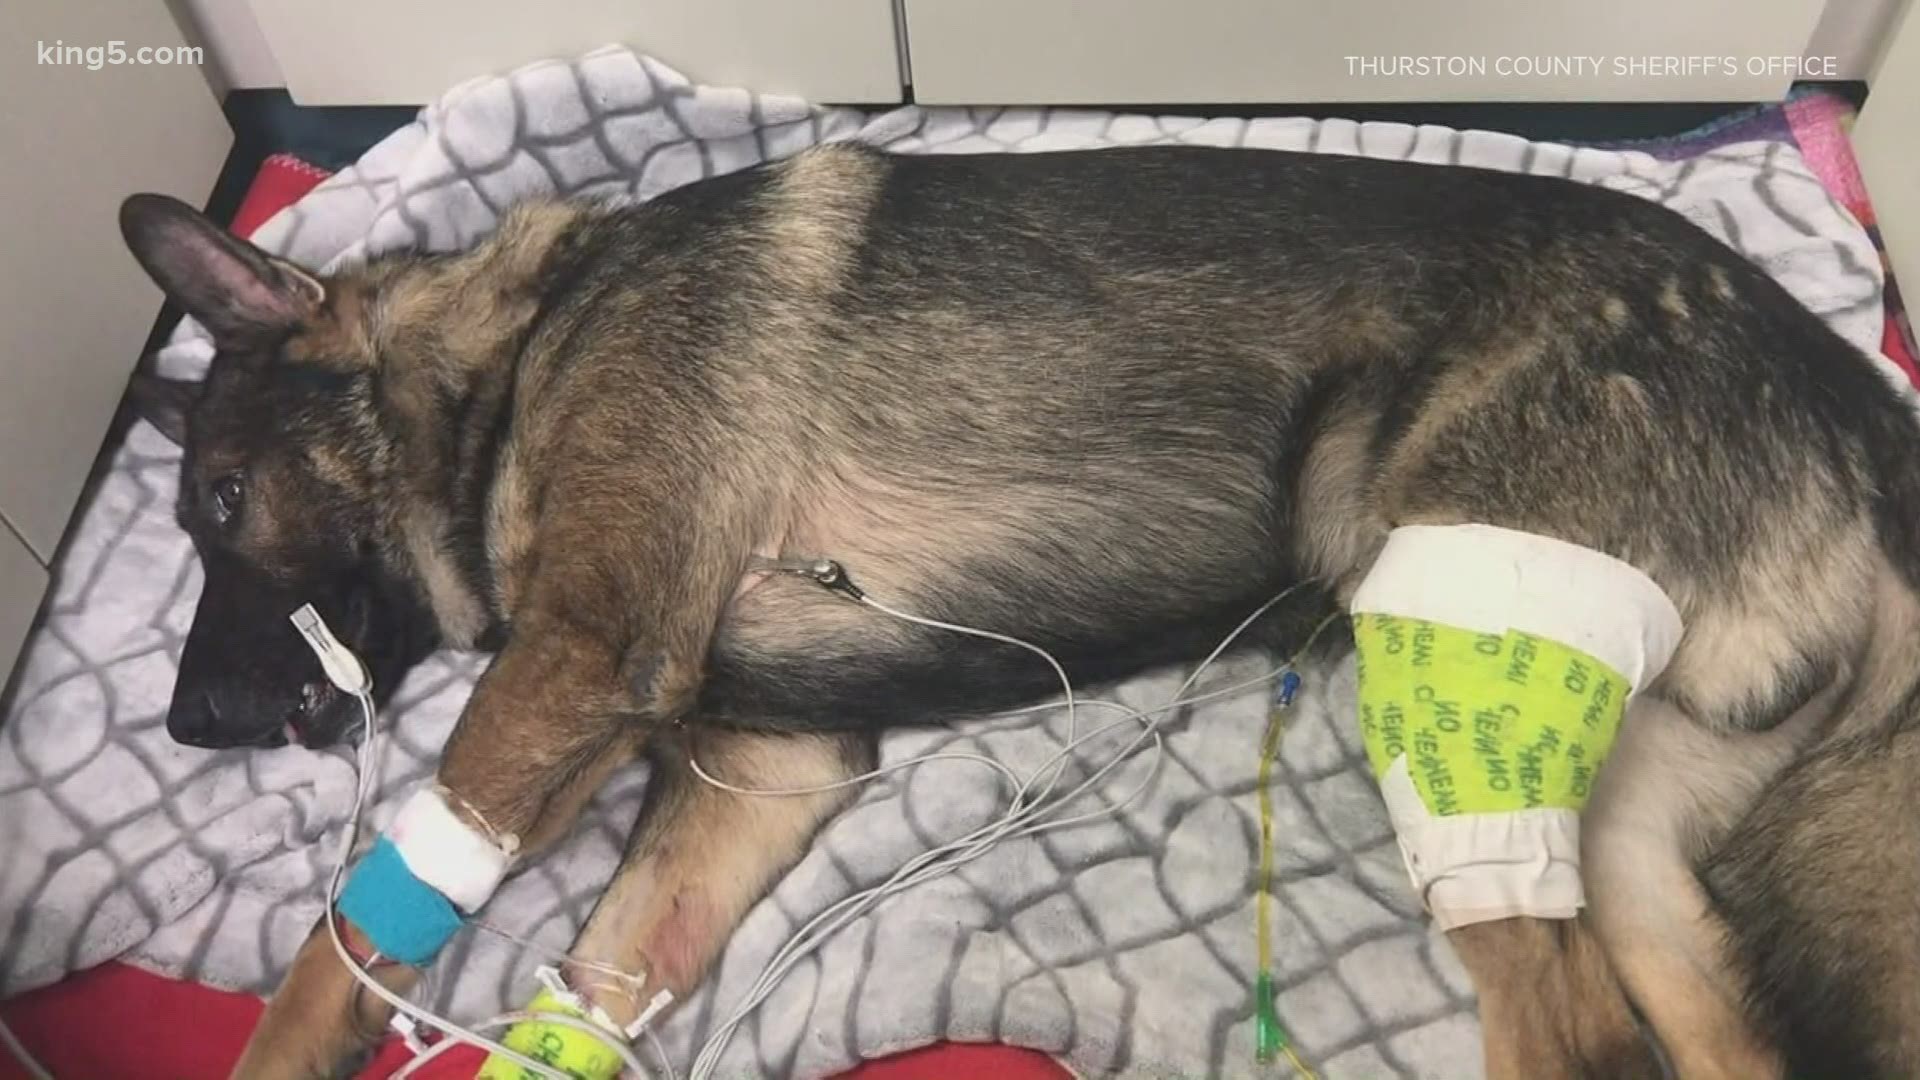 Thurston County Sheriff's K9 Arlo also has a social media fanbase on TikTok. The public has contributed $40,000 for Arlo's care.